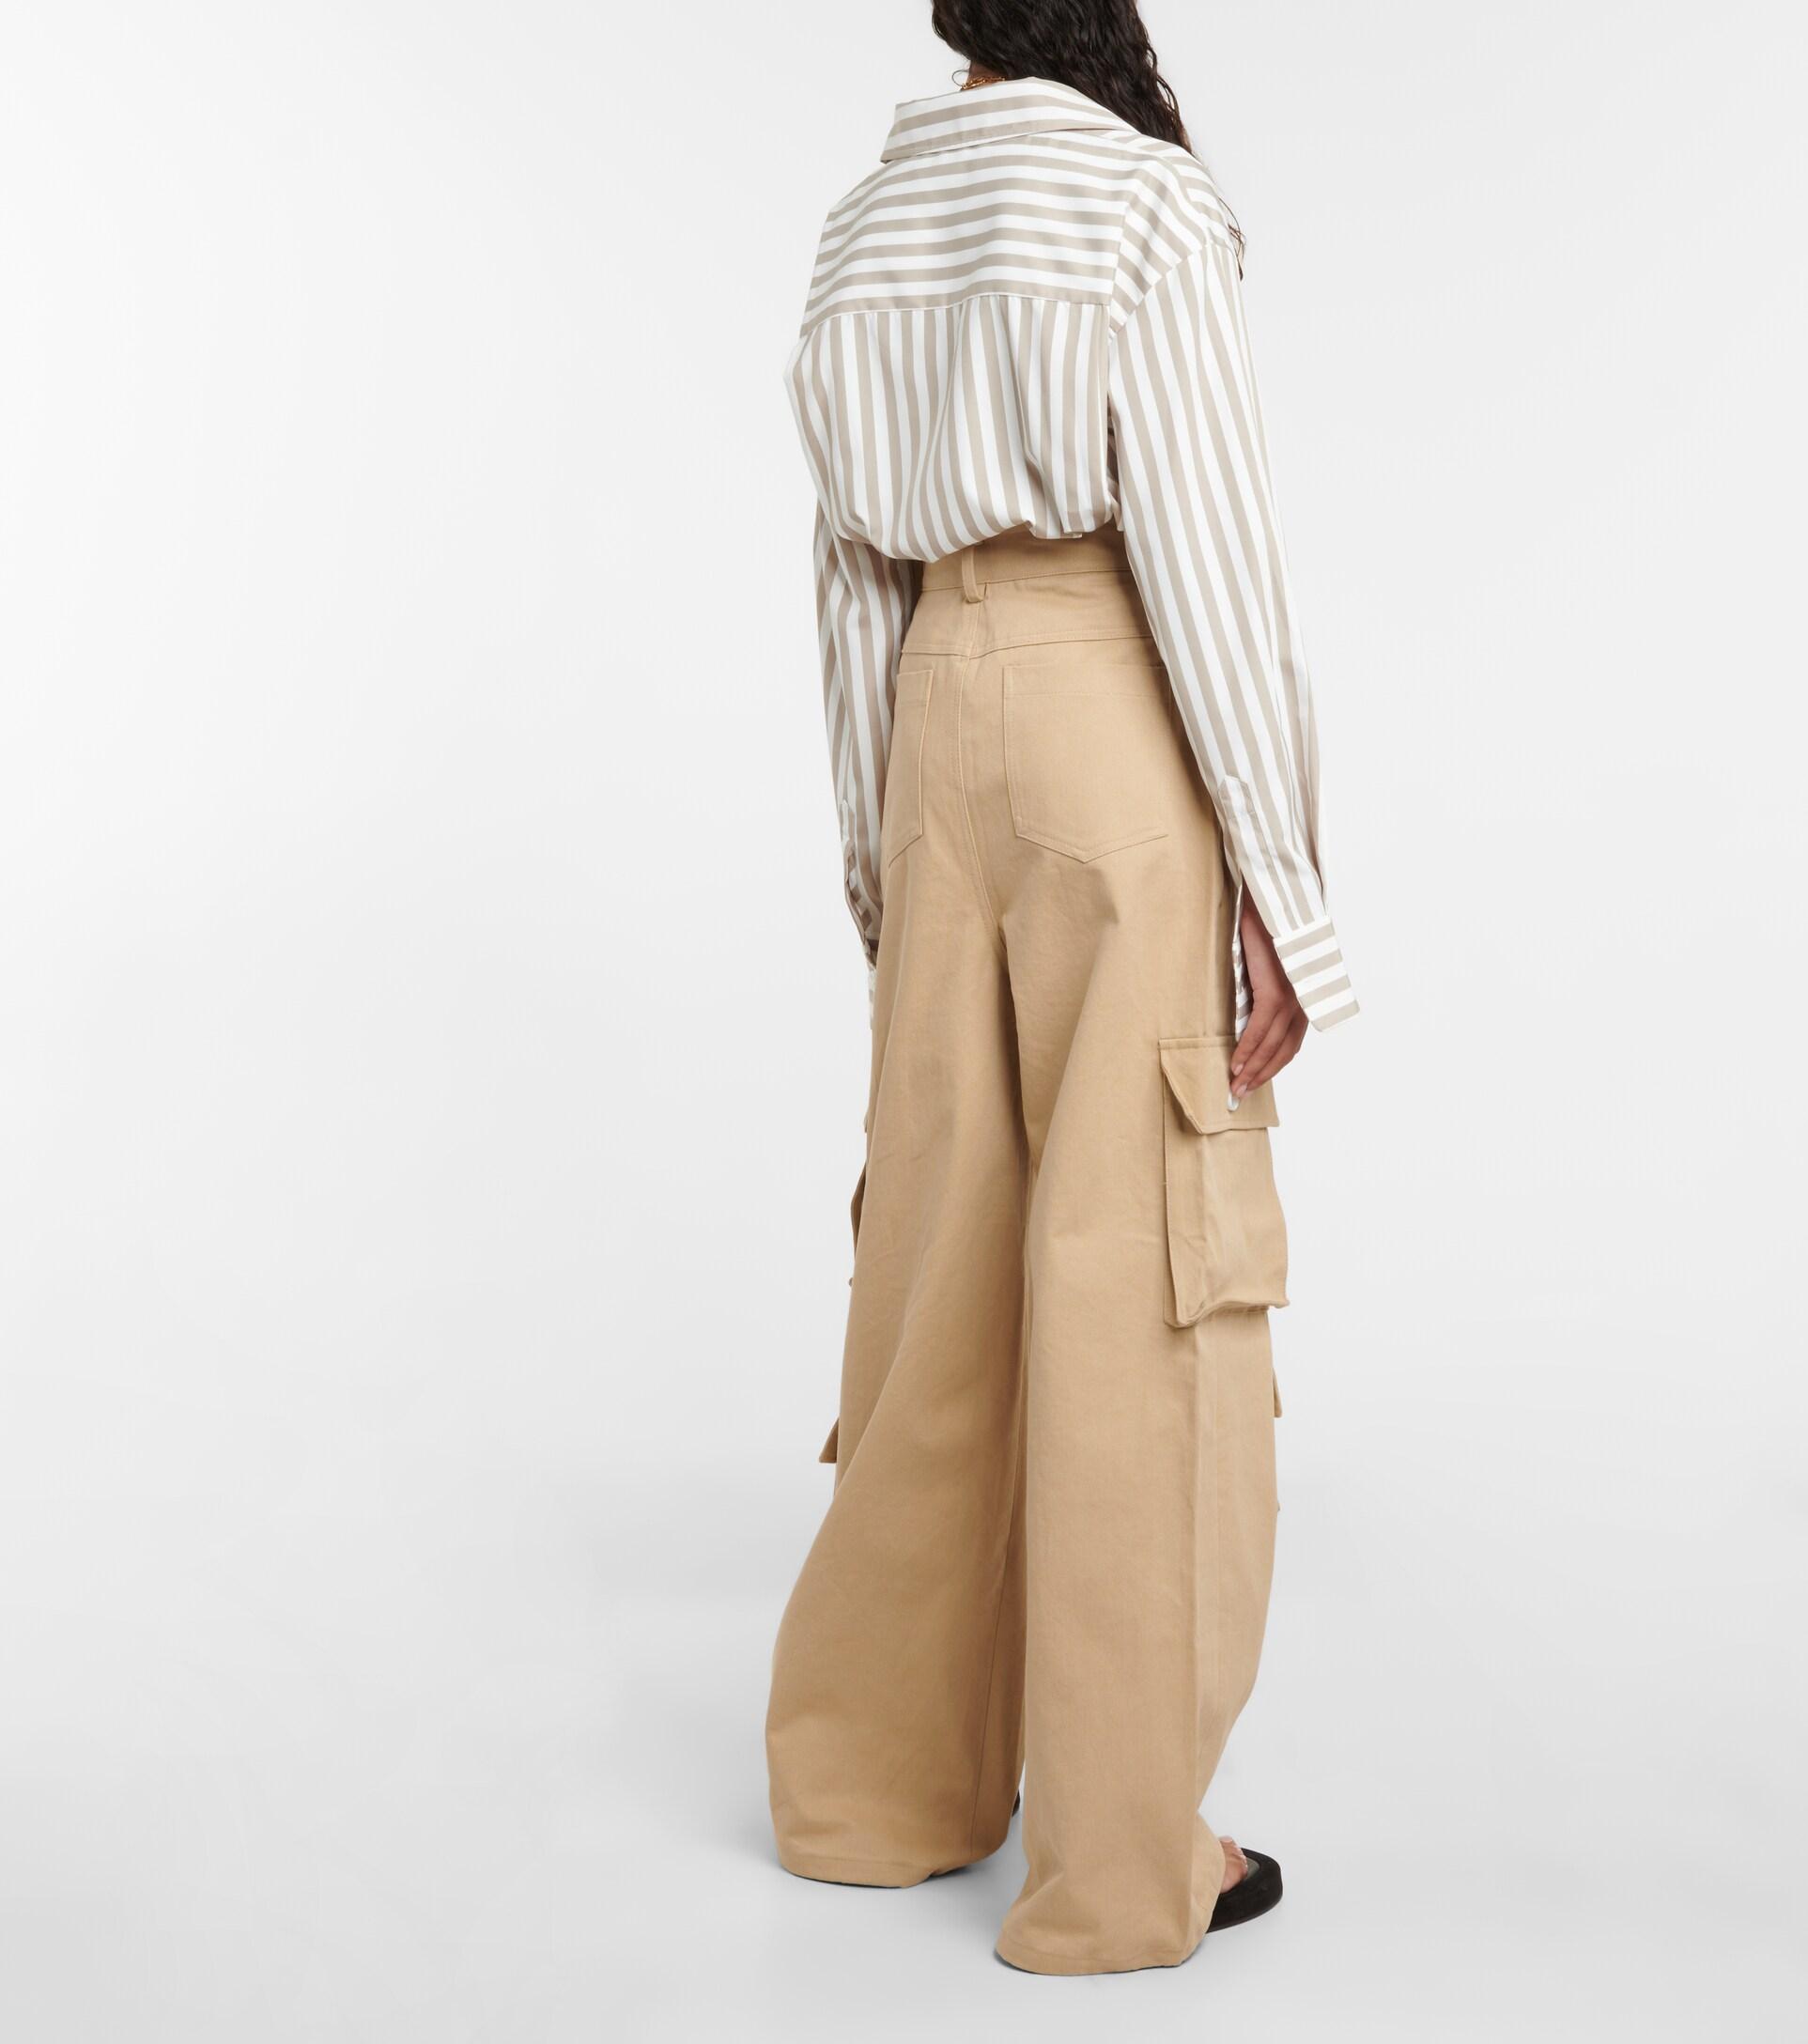 Frankie Shop Hailey High-rise Cotton Cargo Pants in Natural | Lyst